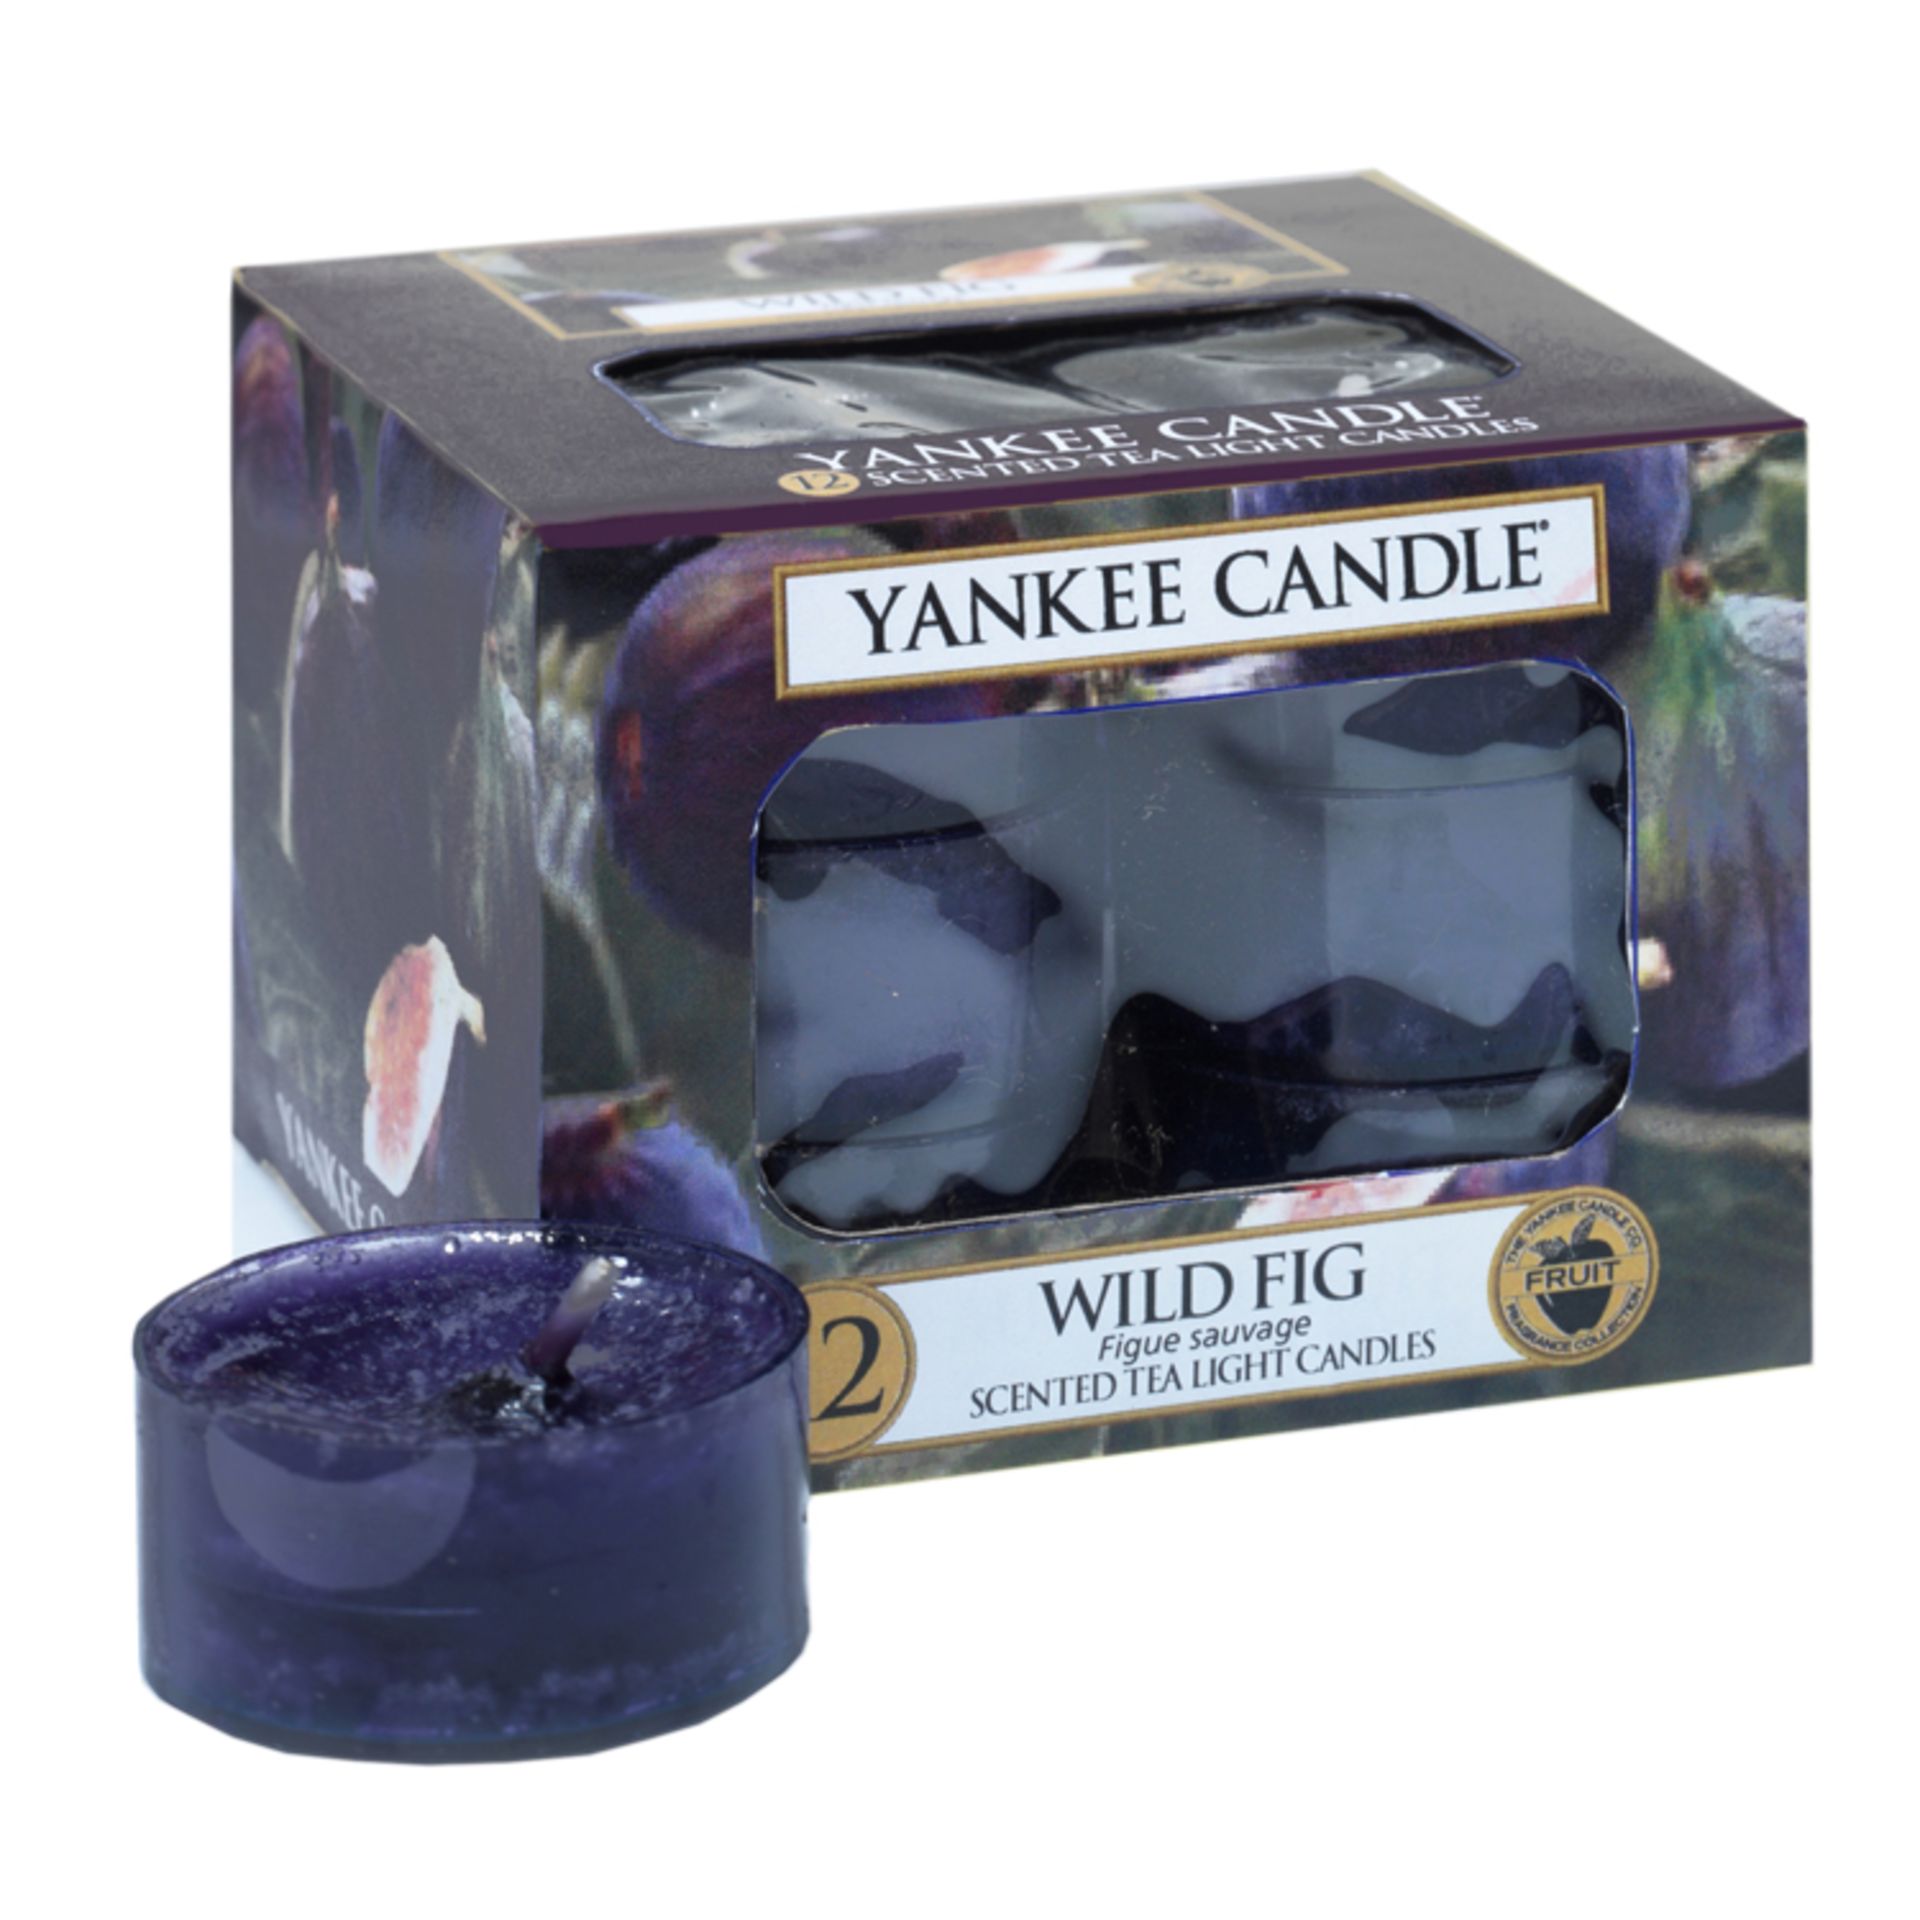 V *TRADE QTY* Brand New 12 Yankee Candle Scented Tea Light Candles Wild Fig eBay Price £7.75 X 5